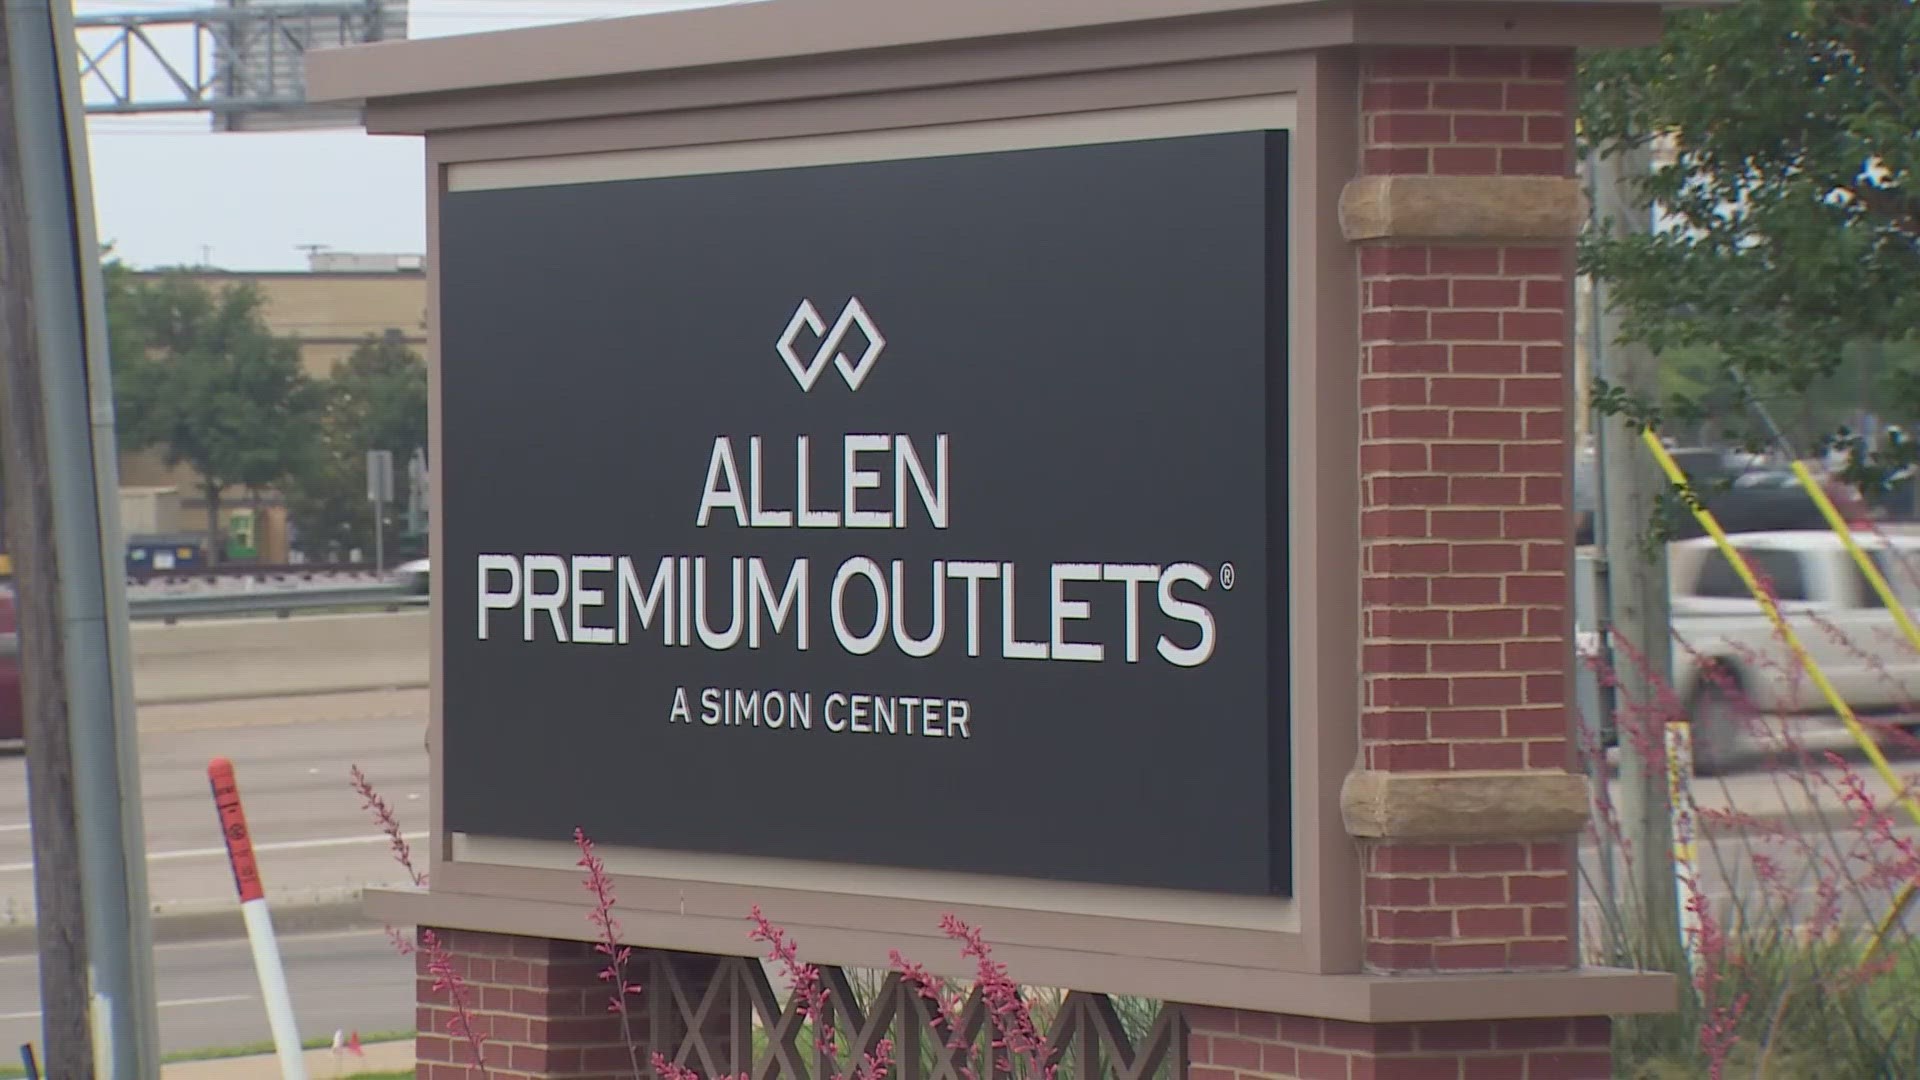 Property owners say Allen Premium Outlets will remain closed until all the funerals of those who lost their lives have taken place.